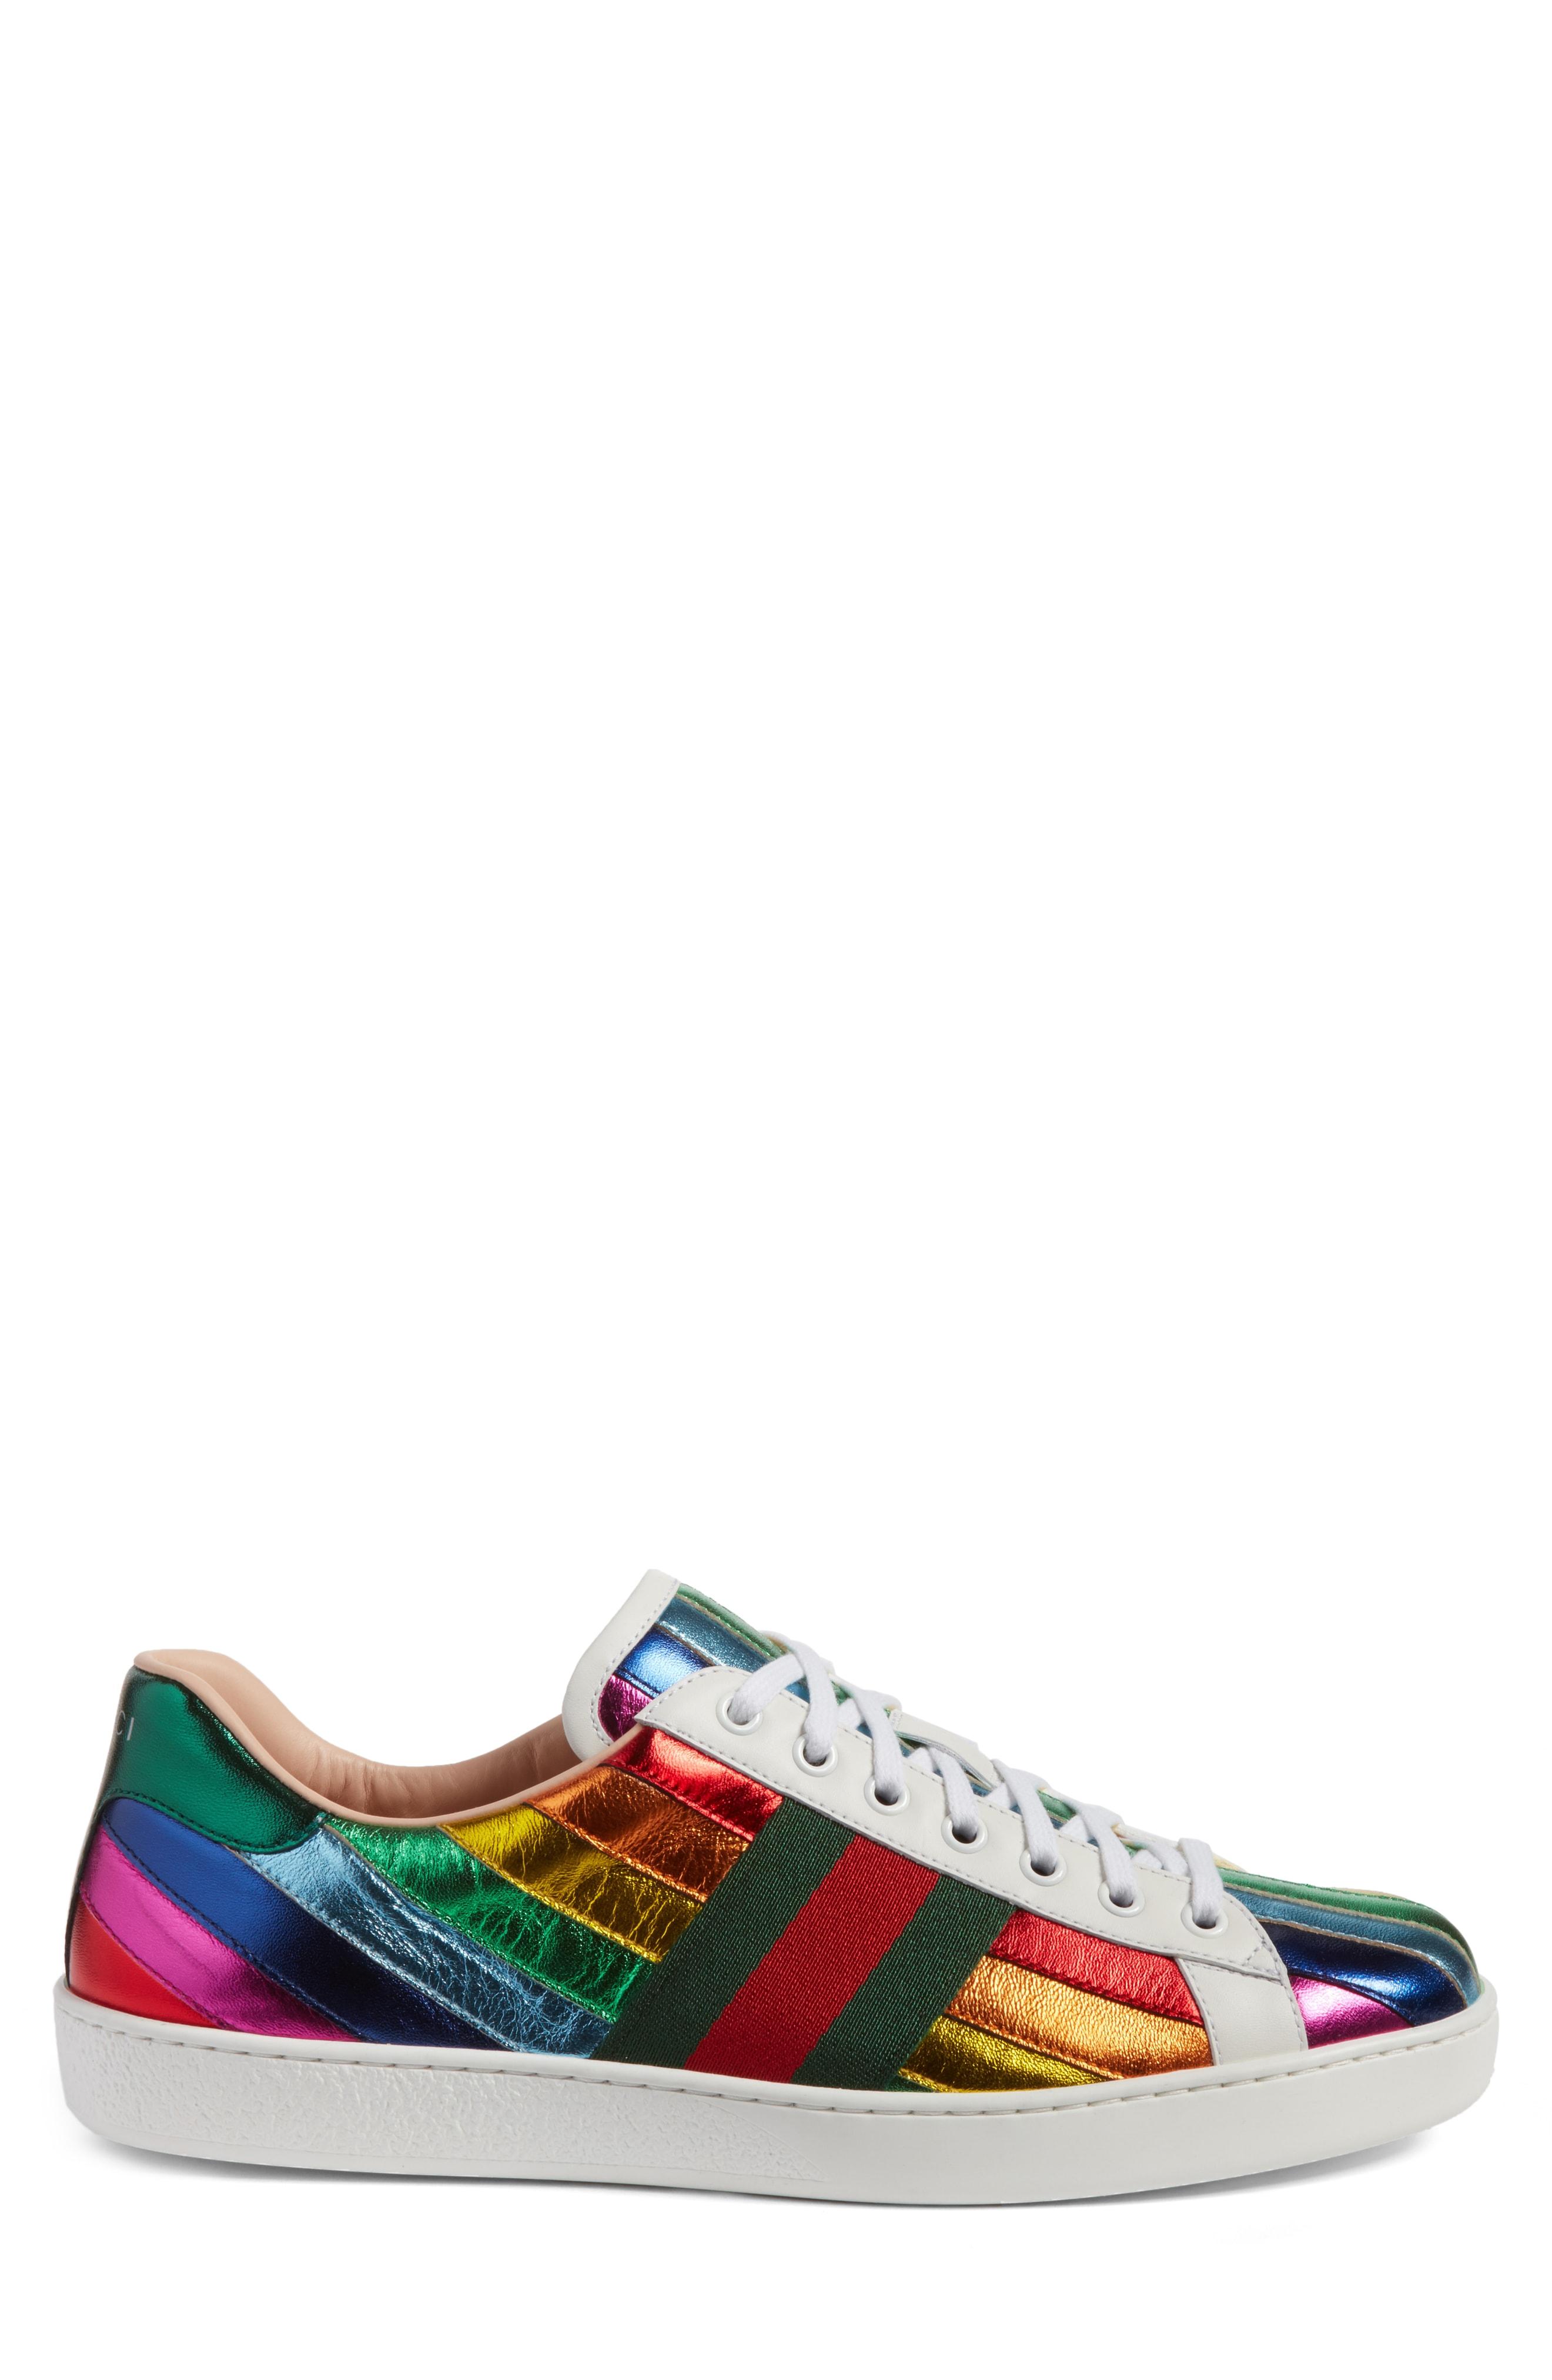 Gucci Men's Ace Metallic Leather Rainbow Sneakers In Multicoloured ...